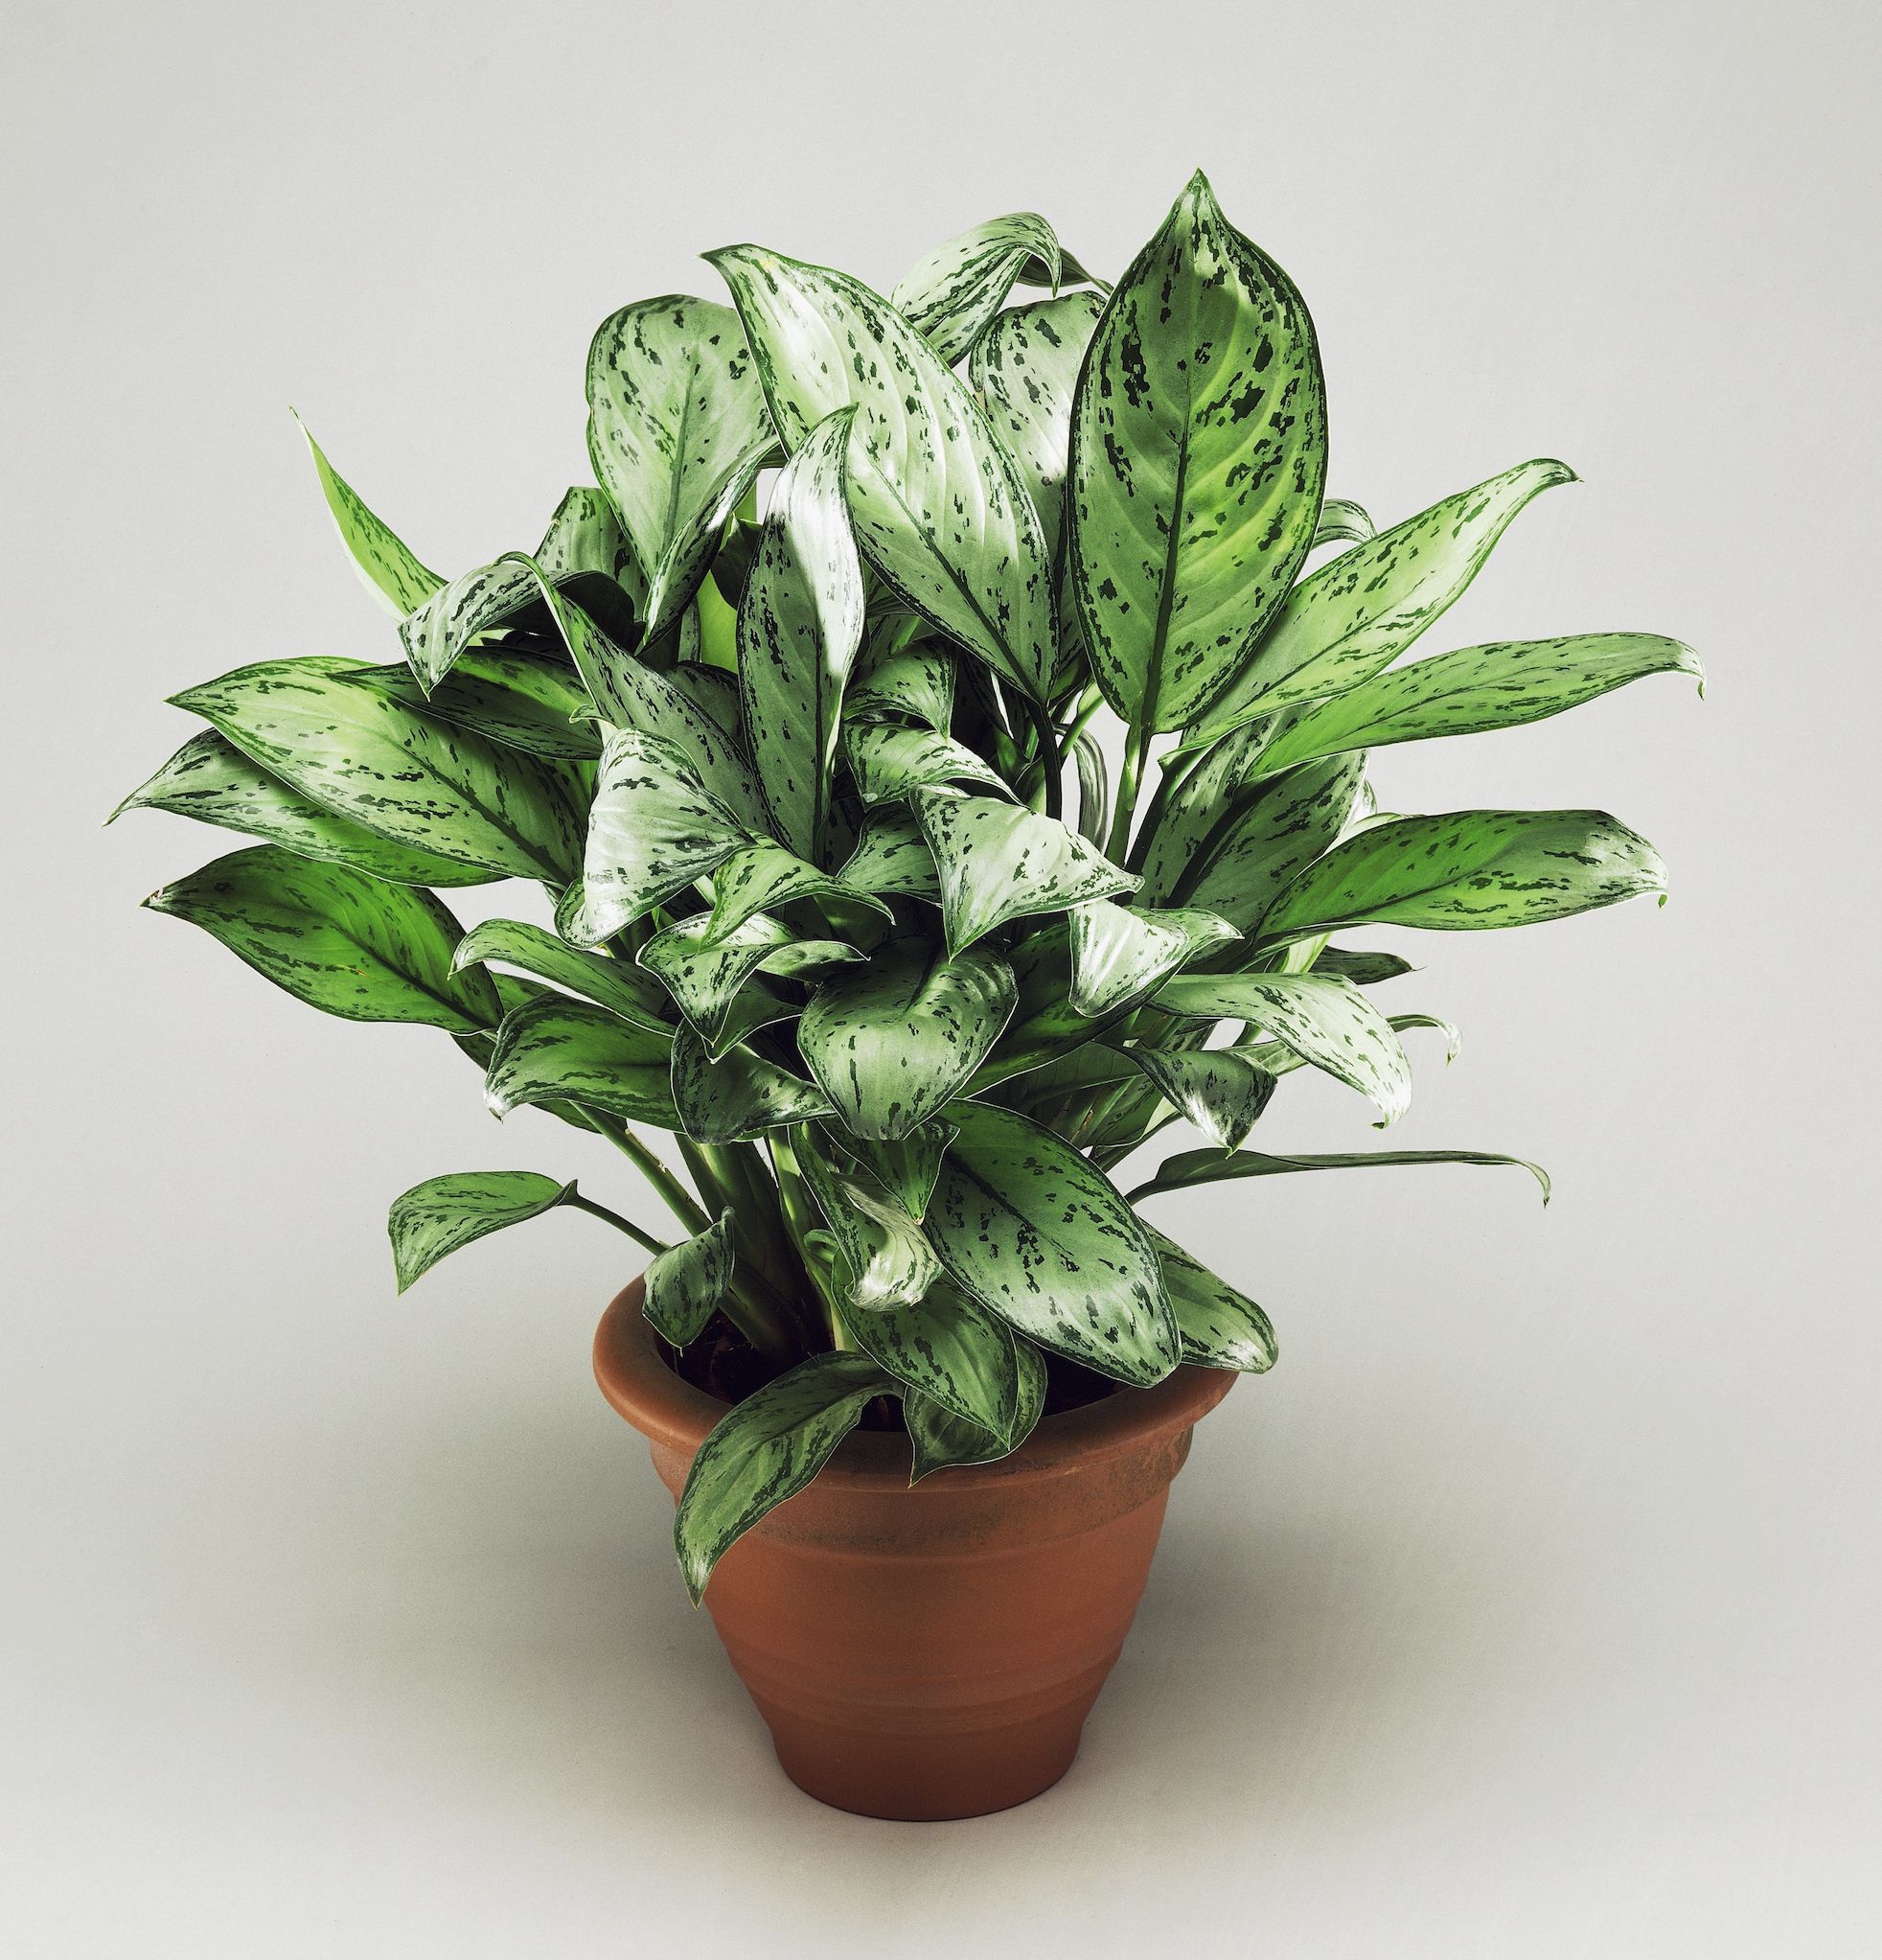 15 Best Indoor Plants For Apartments - Low-Maintenance Plants For